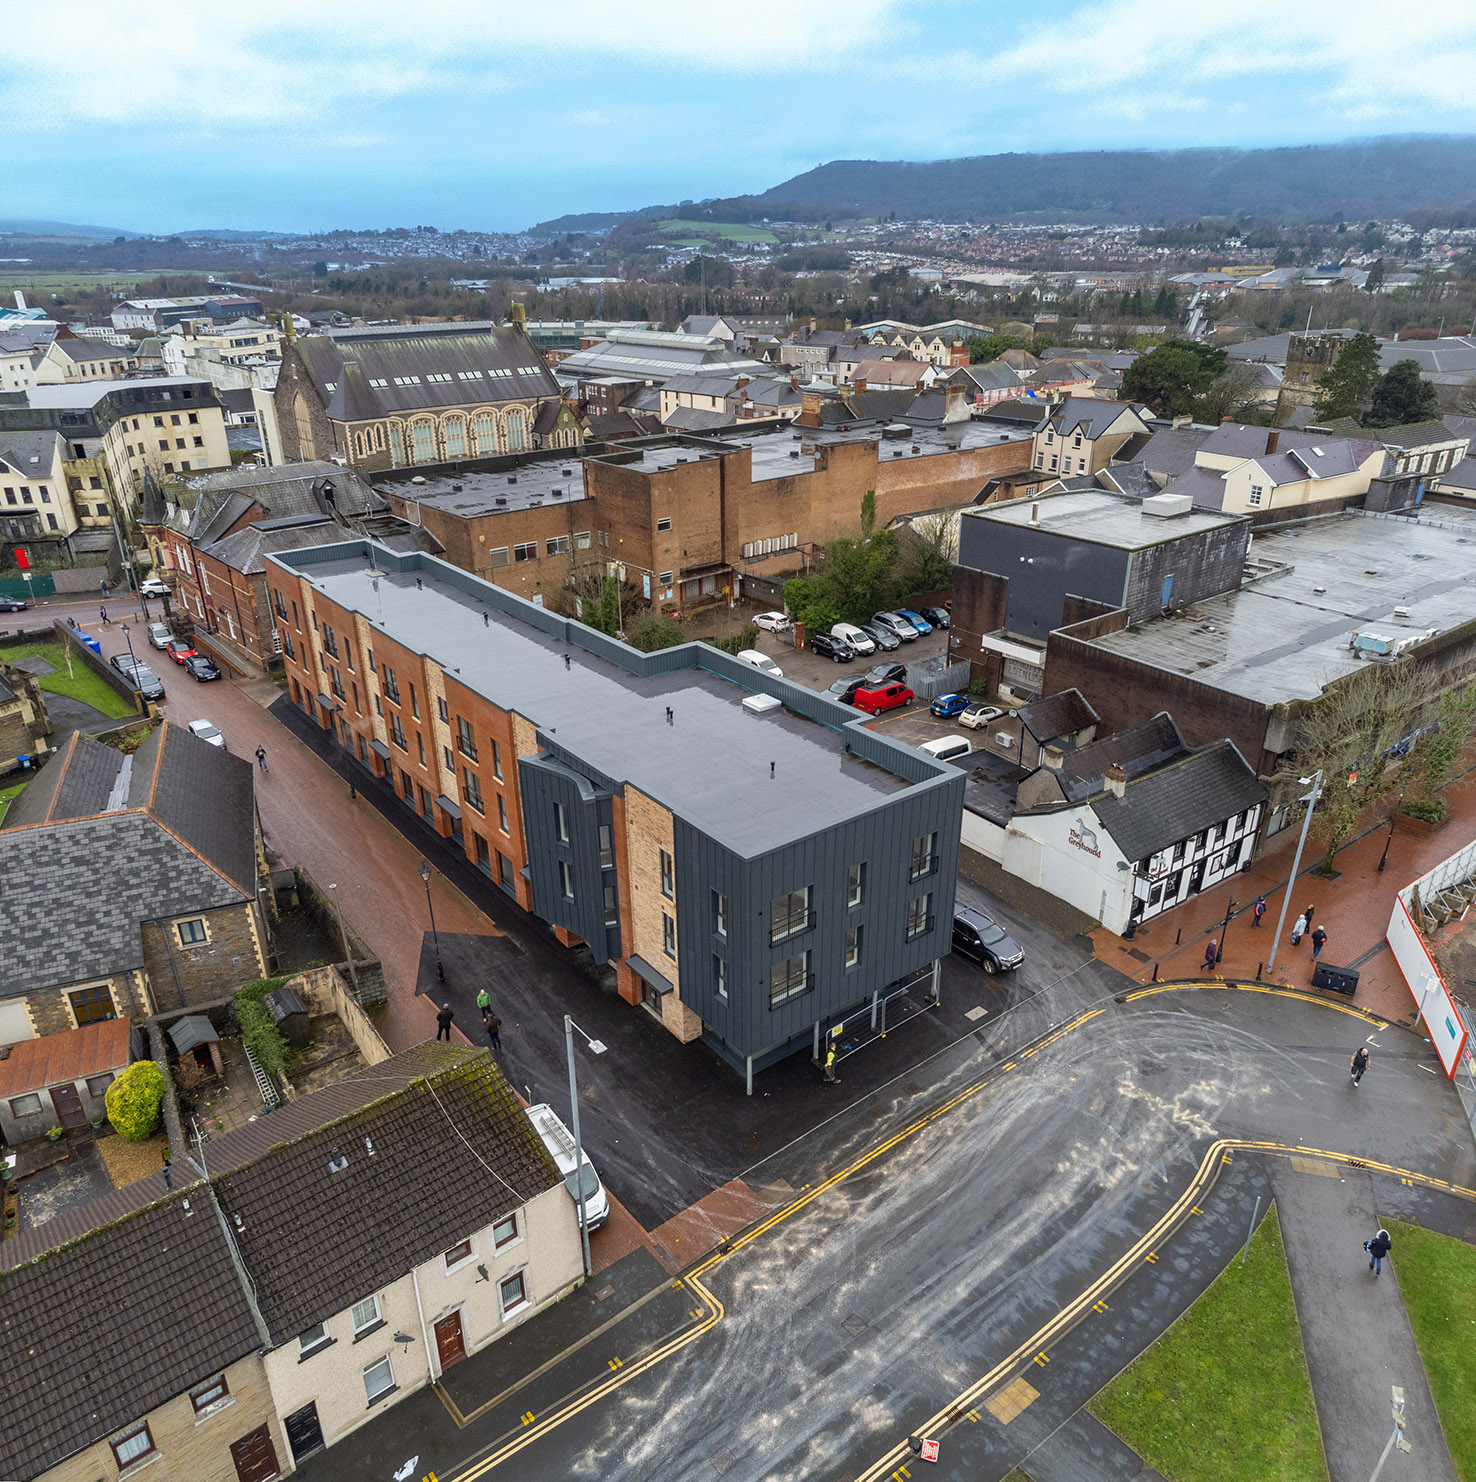 Work completed on Neath Town Centre development